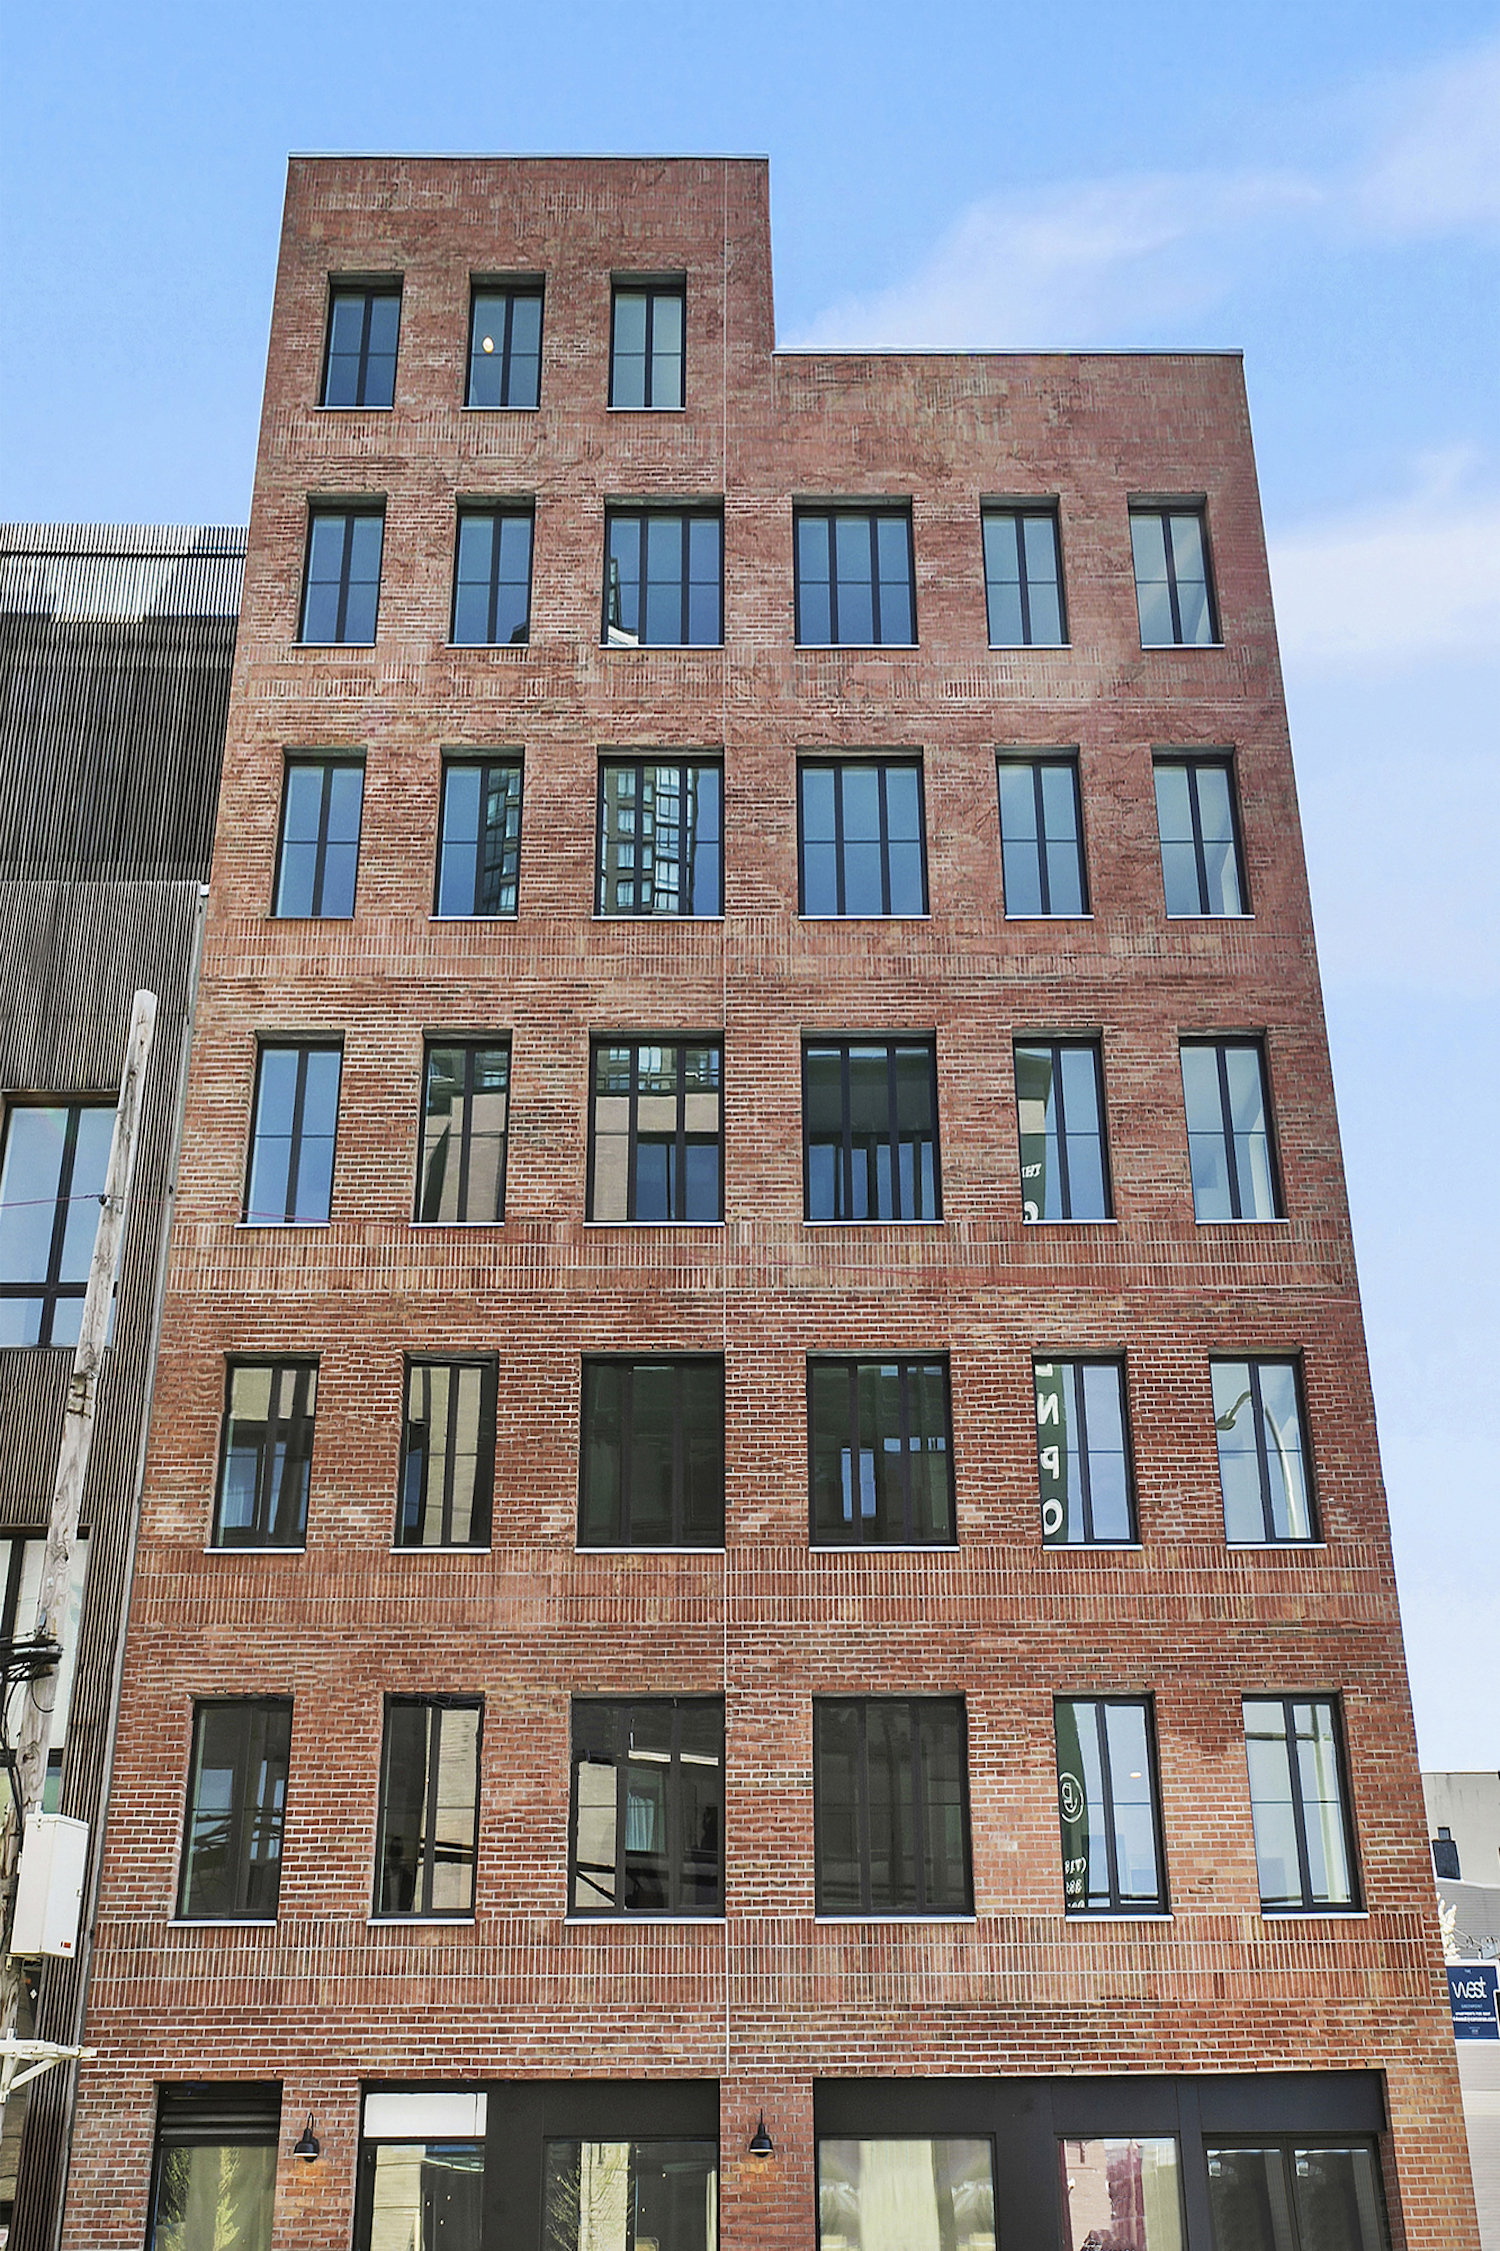 144 West Street in Greenpoint, Brooklyn. All images courtesy of Caspi Development